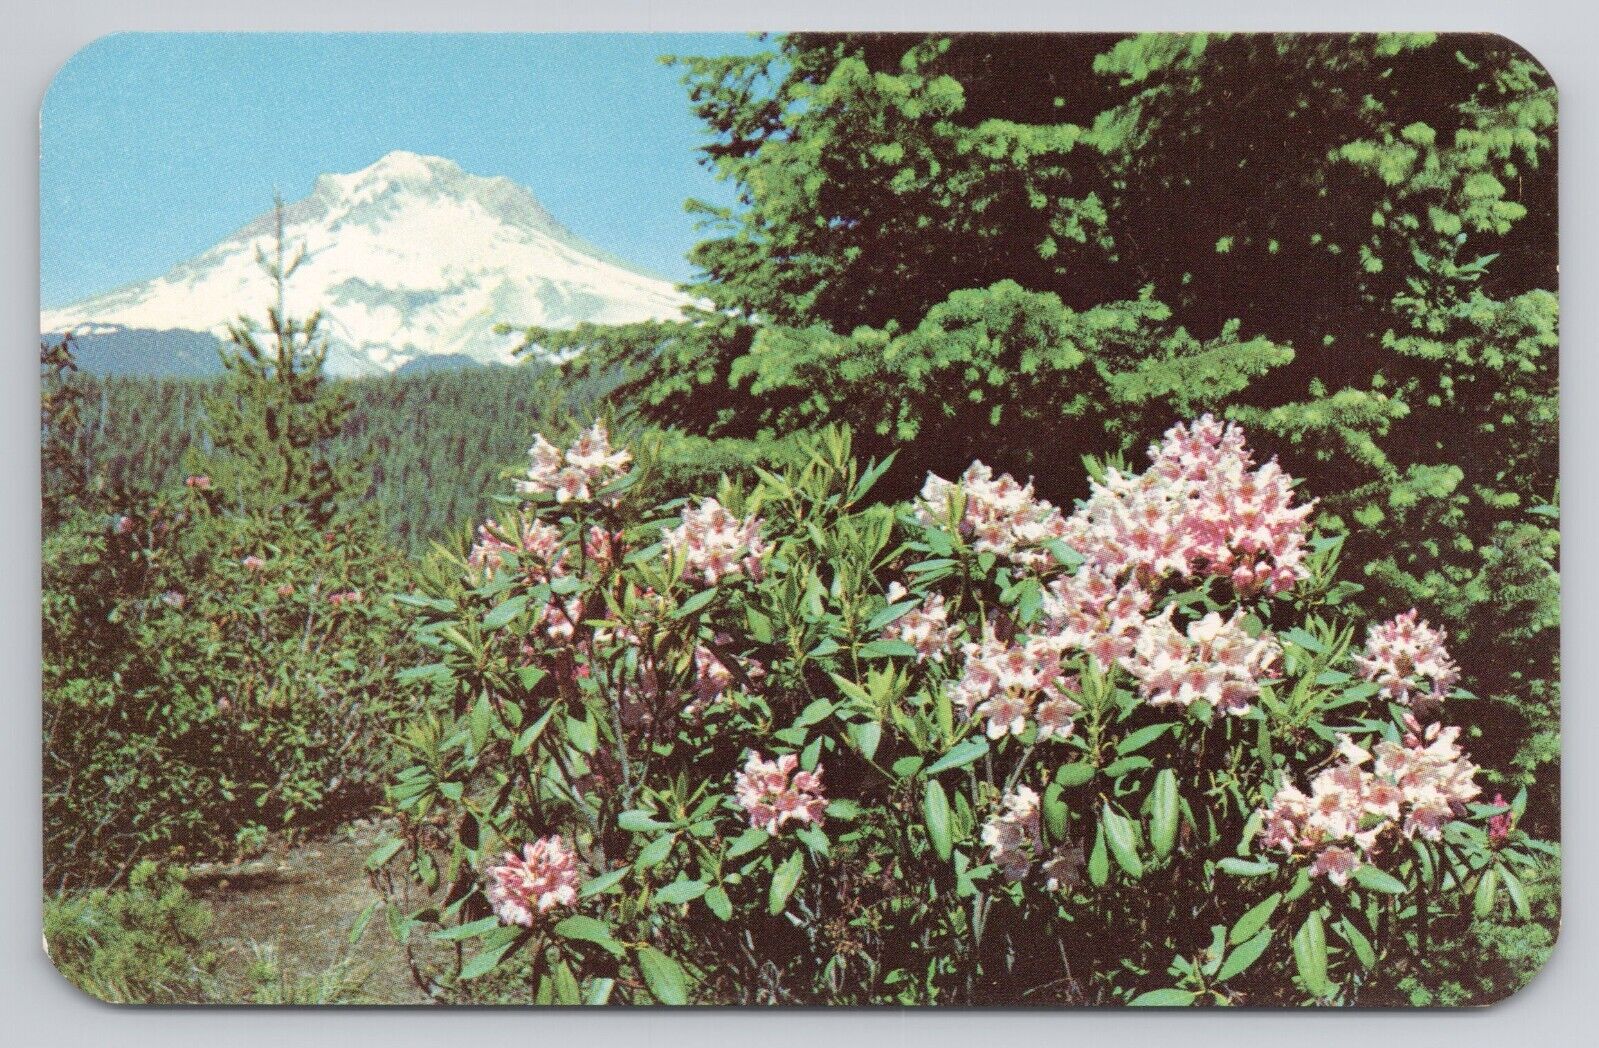 Native Rhododendrons, Oregon Postcard 3495